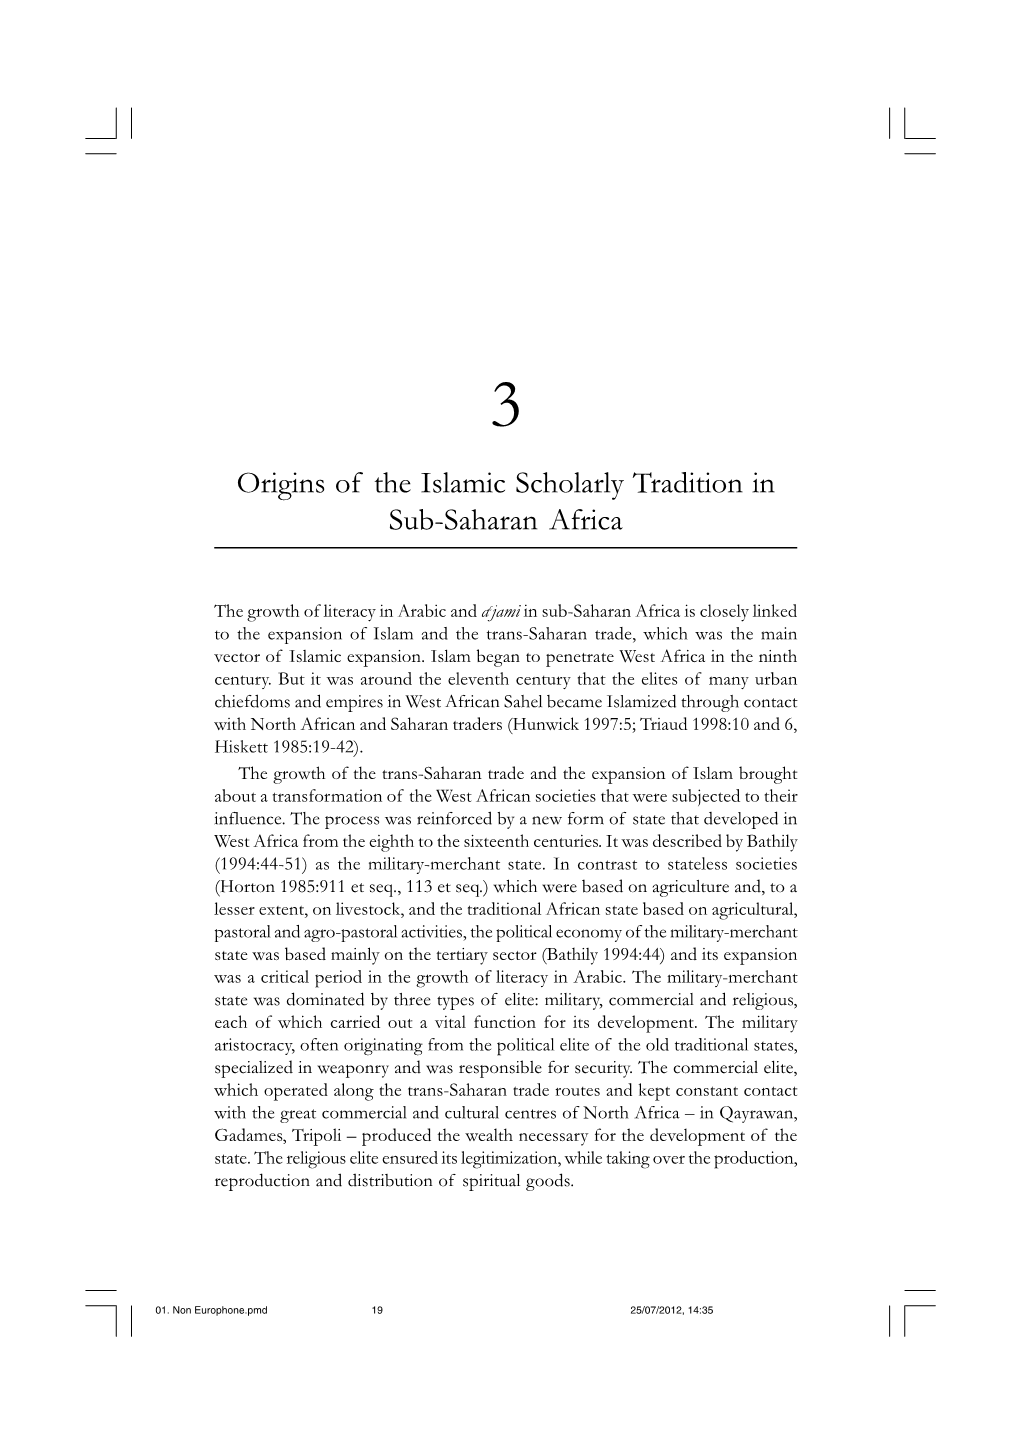 Origins of the Islamic Scholarly Tradition in Sub-Saharan Africa